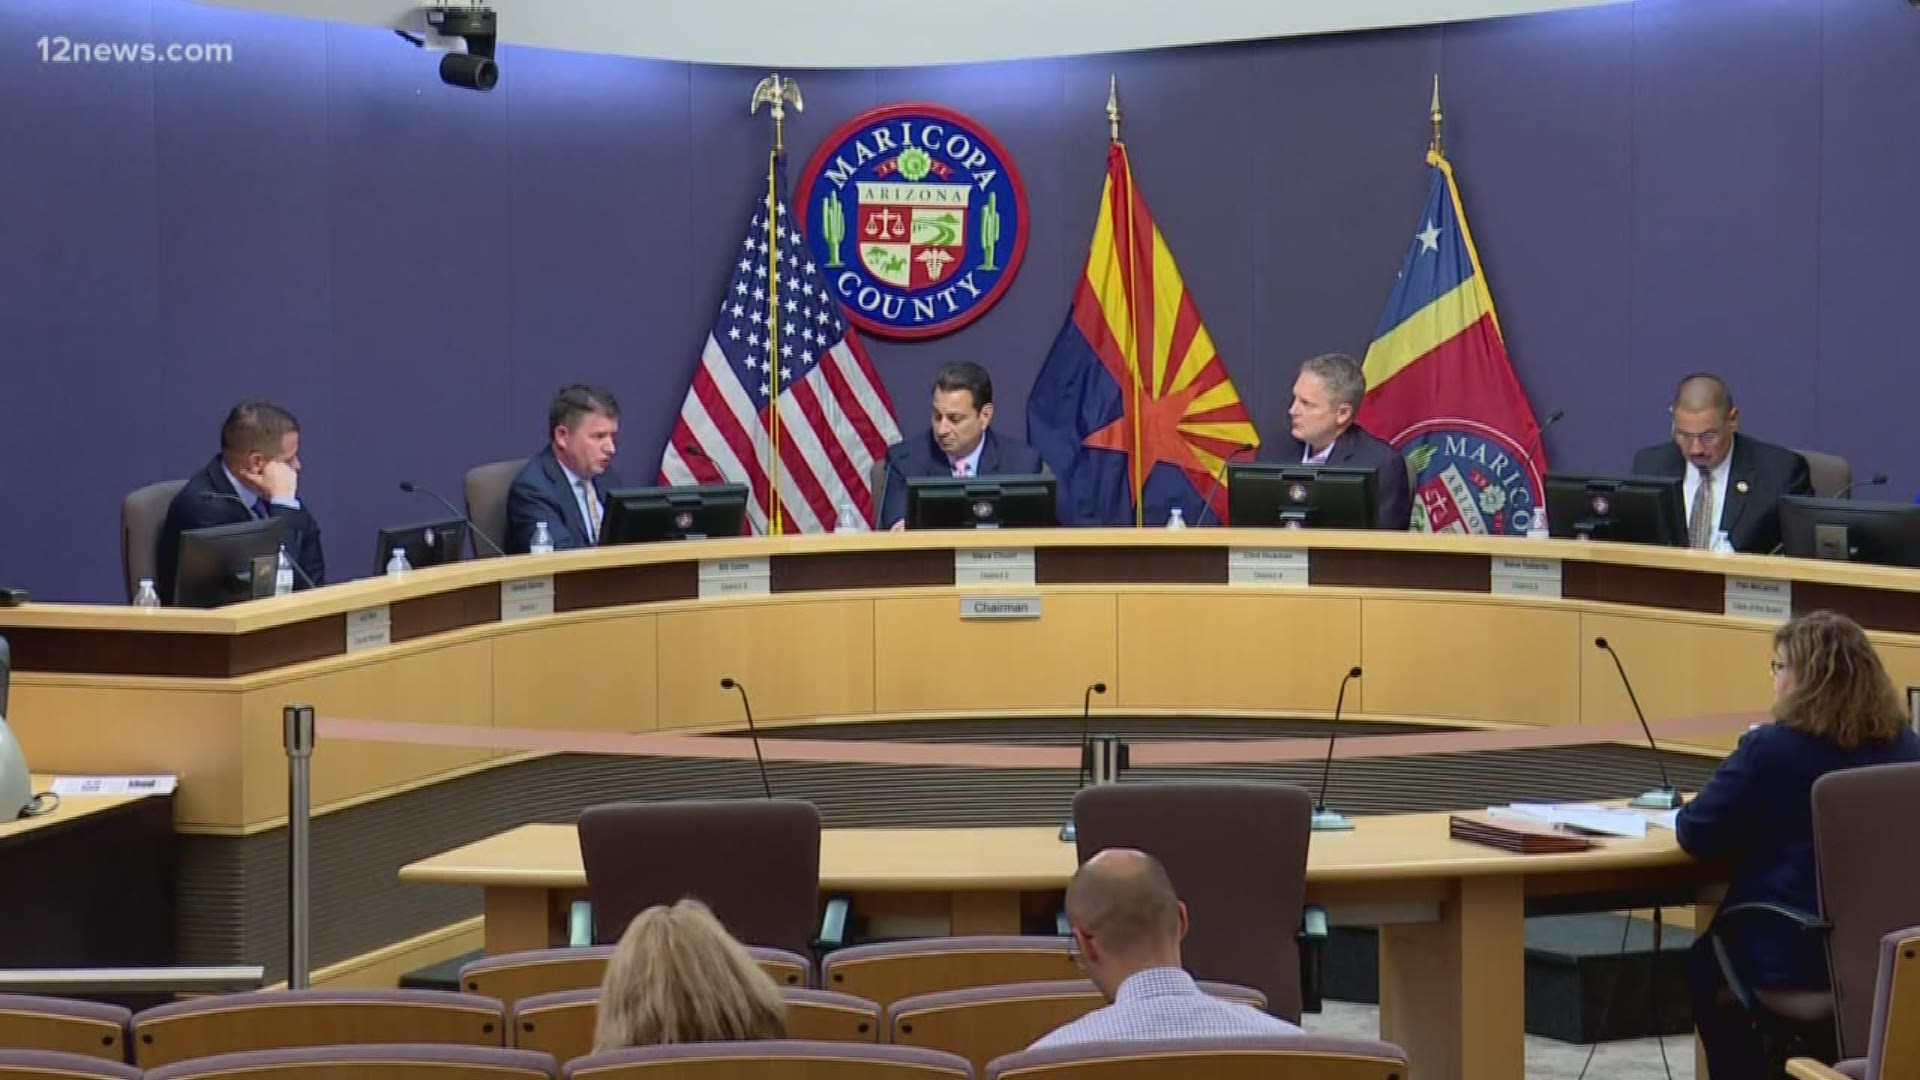 The primary election last week was plagued with problems. Today the Maricopa County Board of Supervisors demanded answers from County Recorder Adrian Fontes.